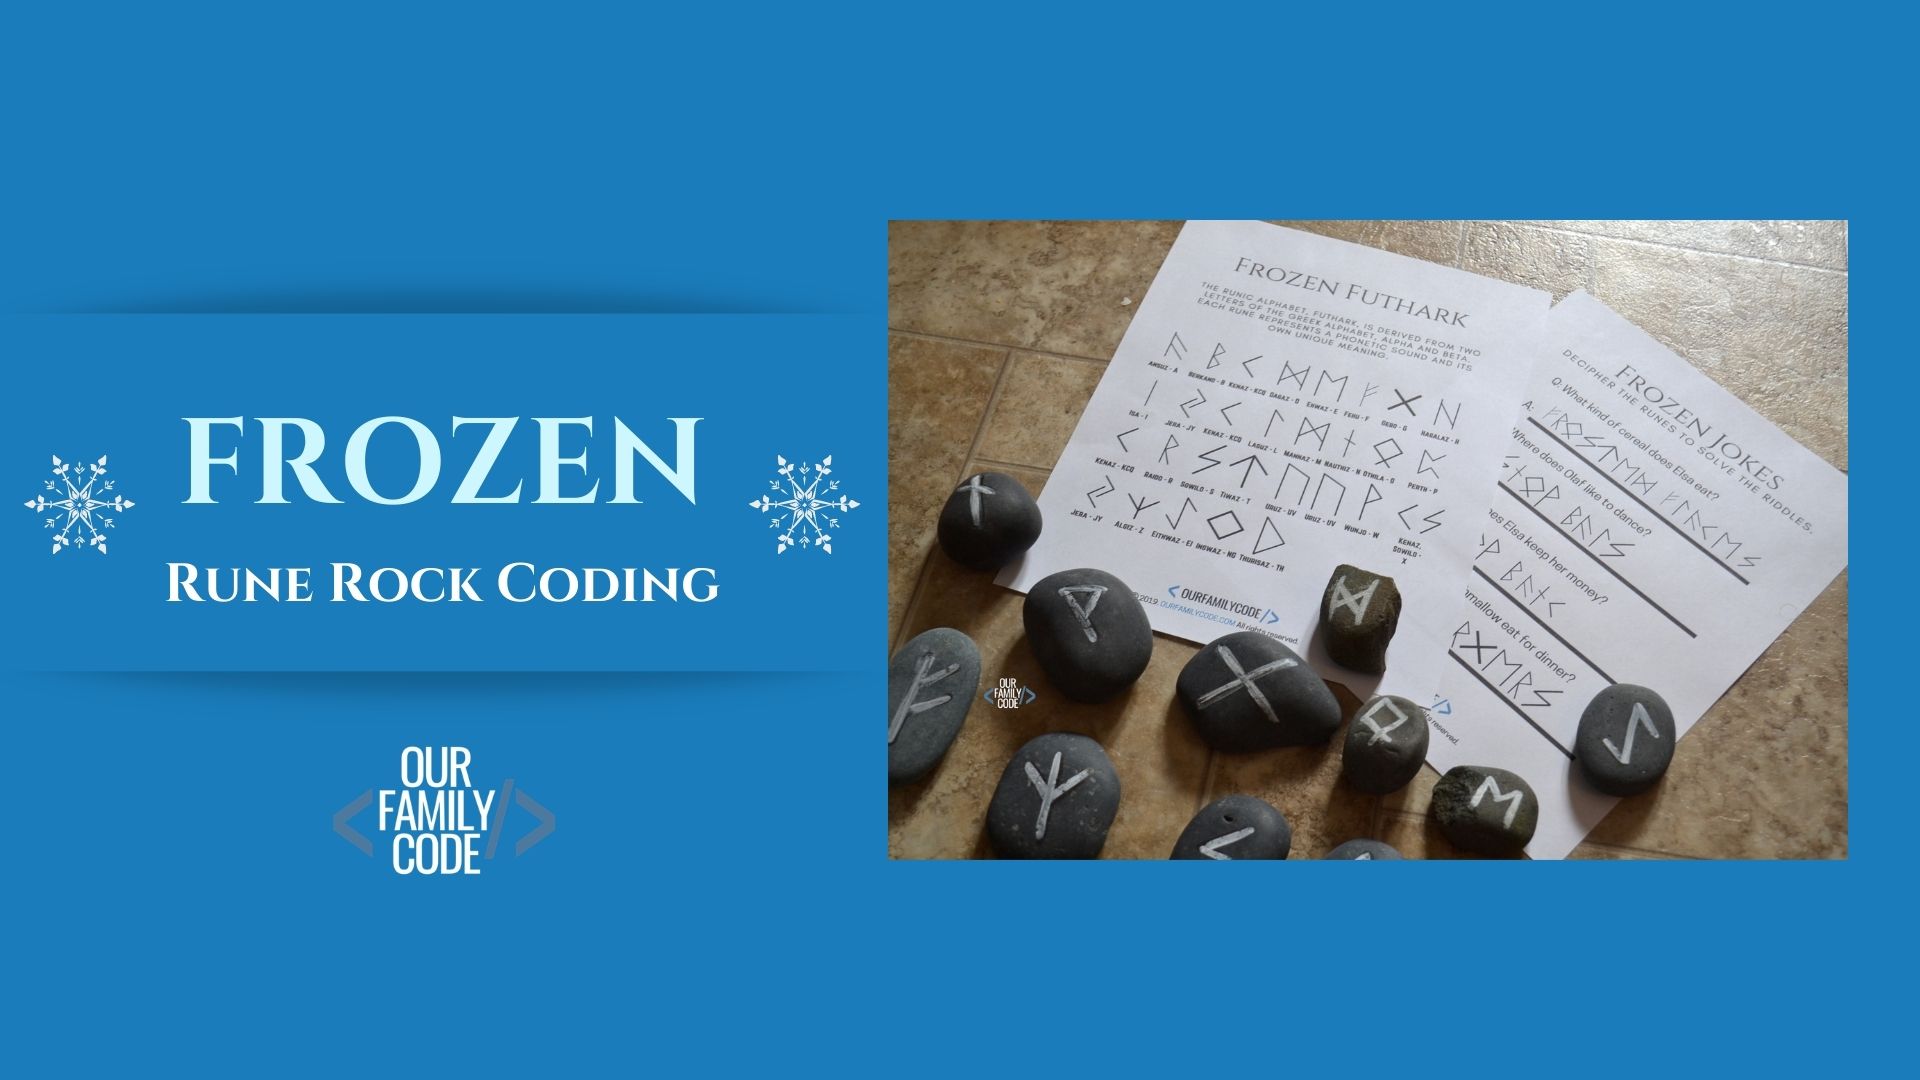 A picture of a Frozen Rune Rock coding activity on blue background.